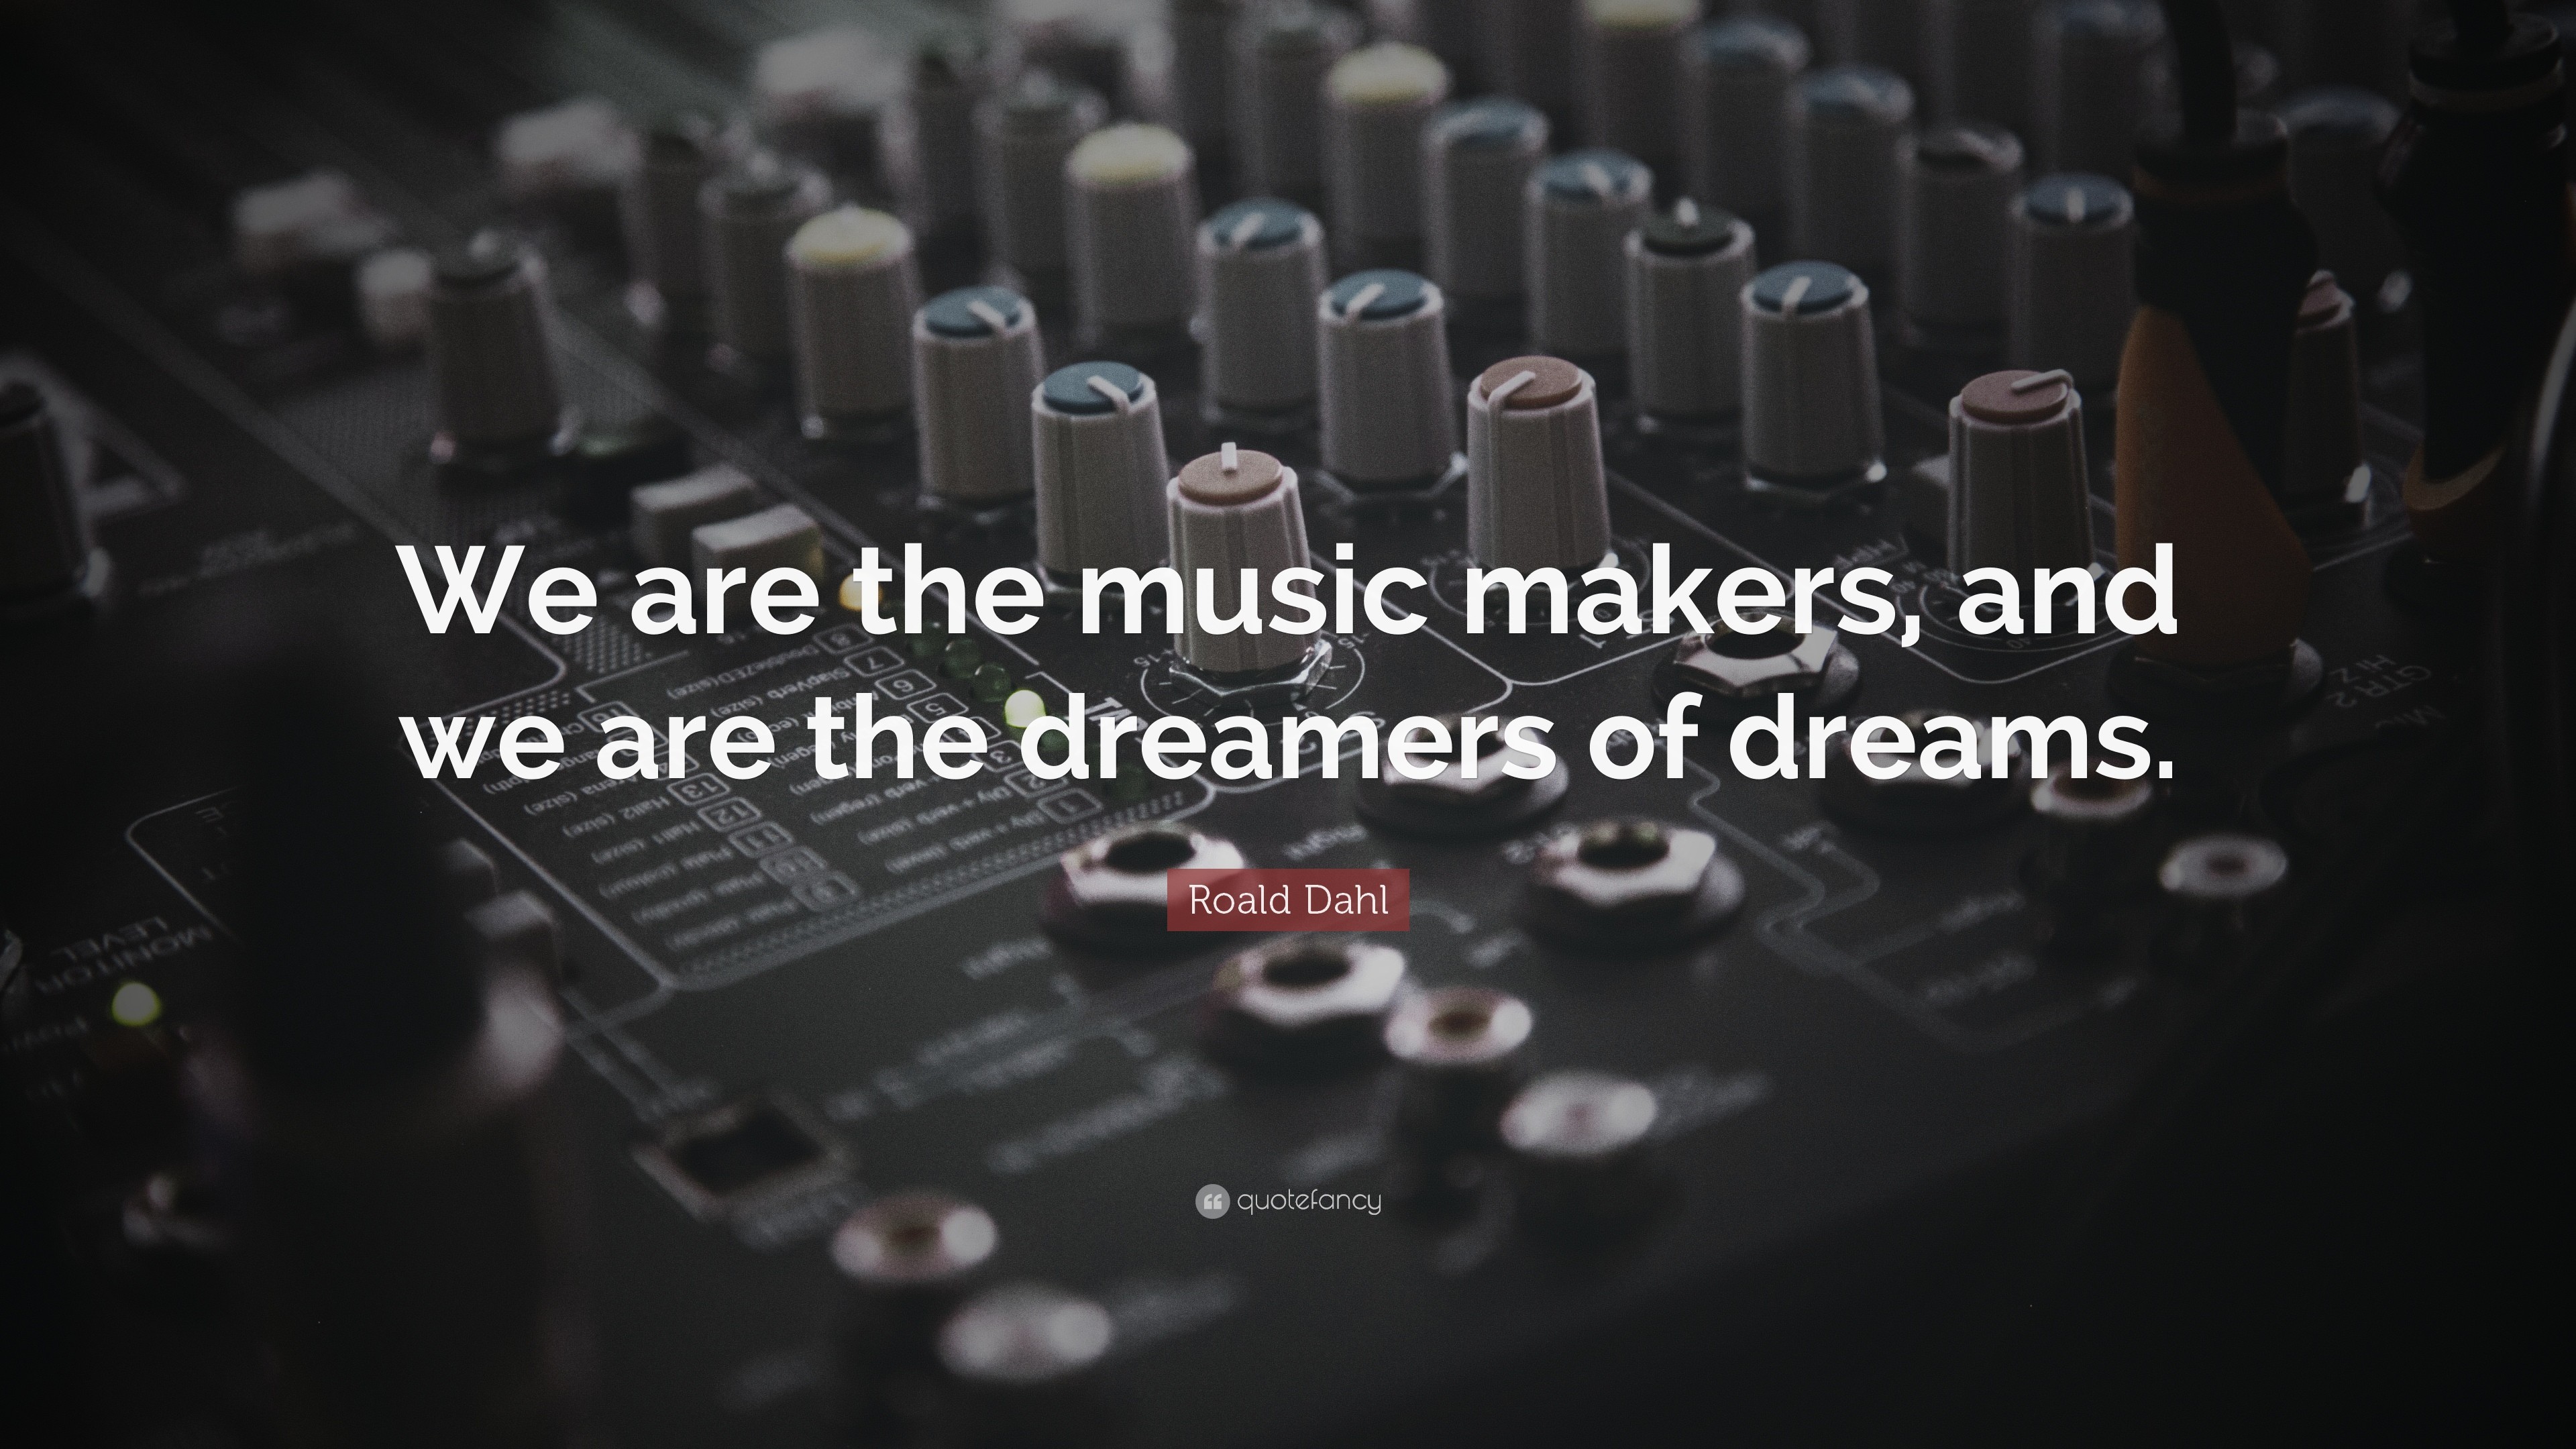 3840x2160 Music Quotes: “We are the music makers, and we are the dreamers of